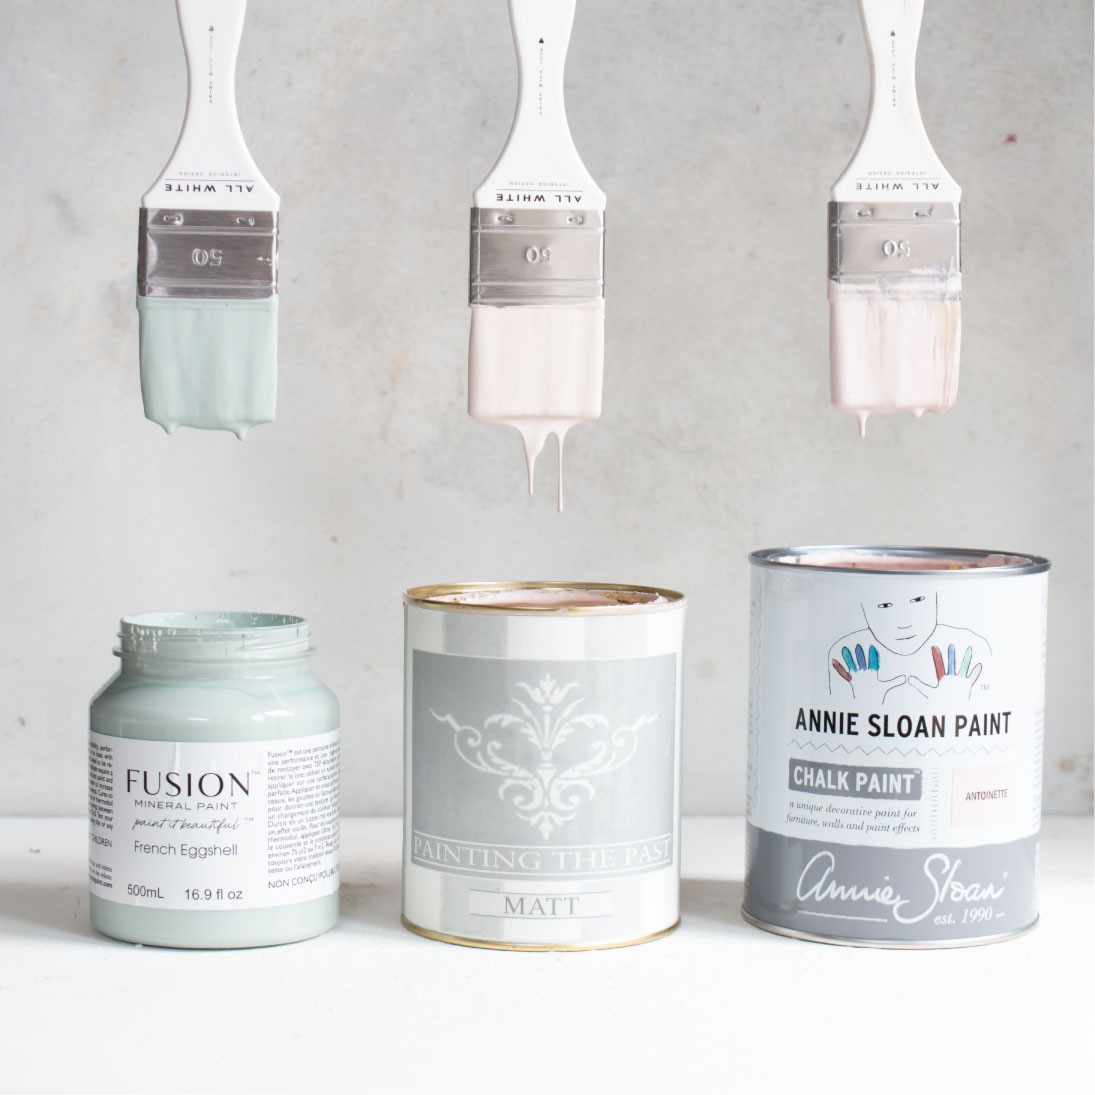 Fusion Mineral Paint vernice ecologica, Chalk paint, painting the past